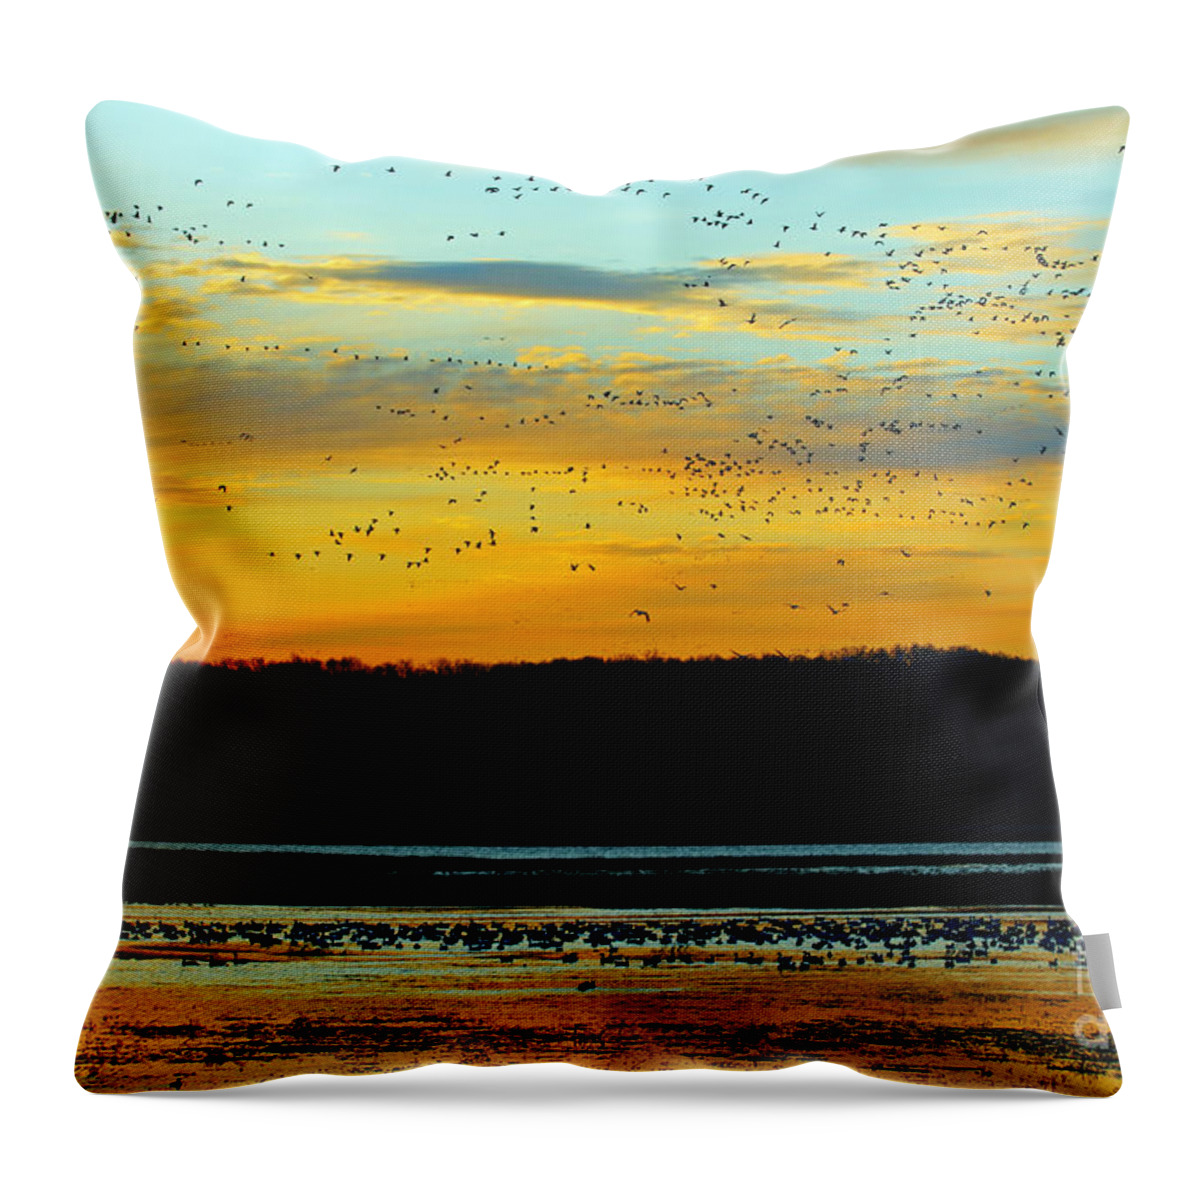 Birds Throw Pillow featuring the photograph The Travelers by Elizabeth Winter